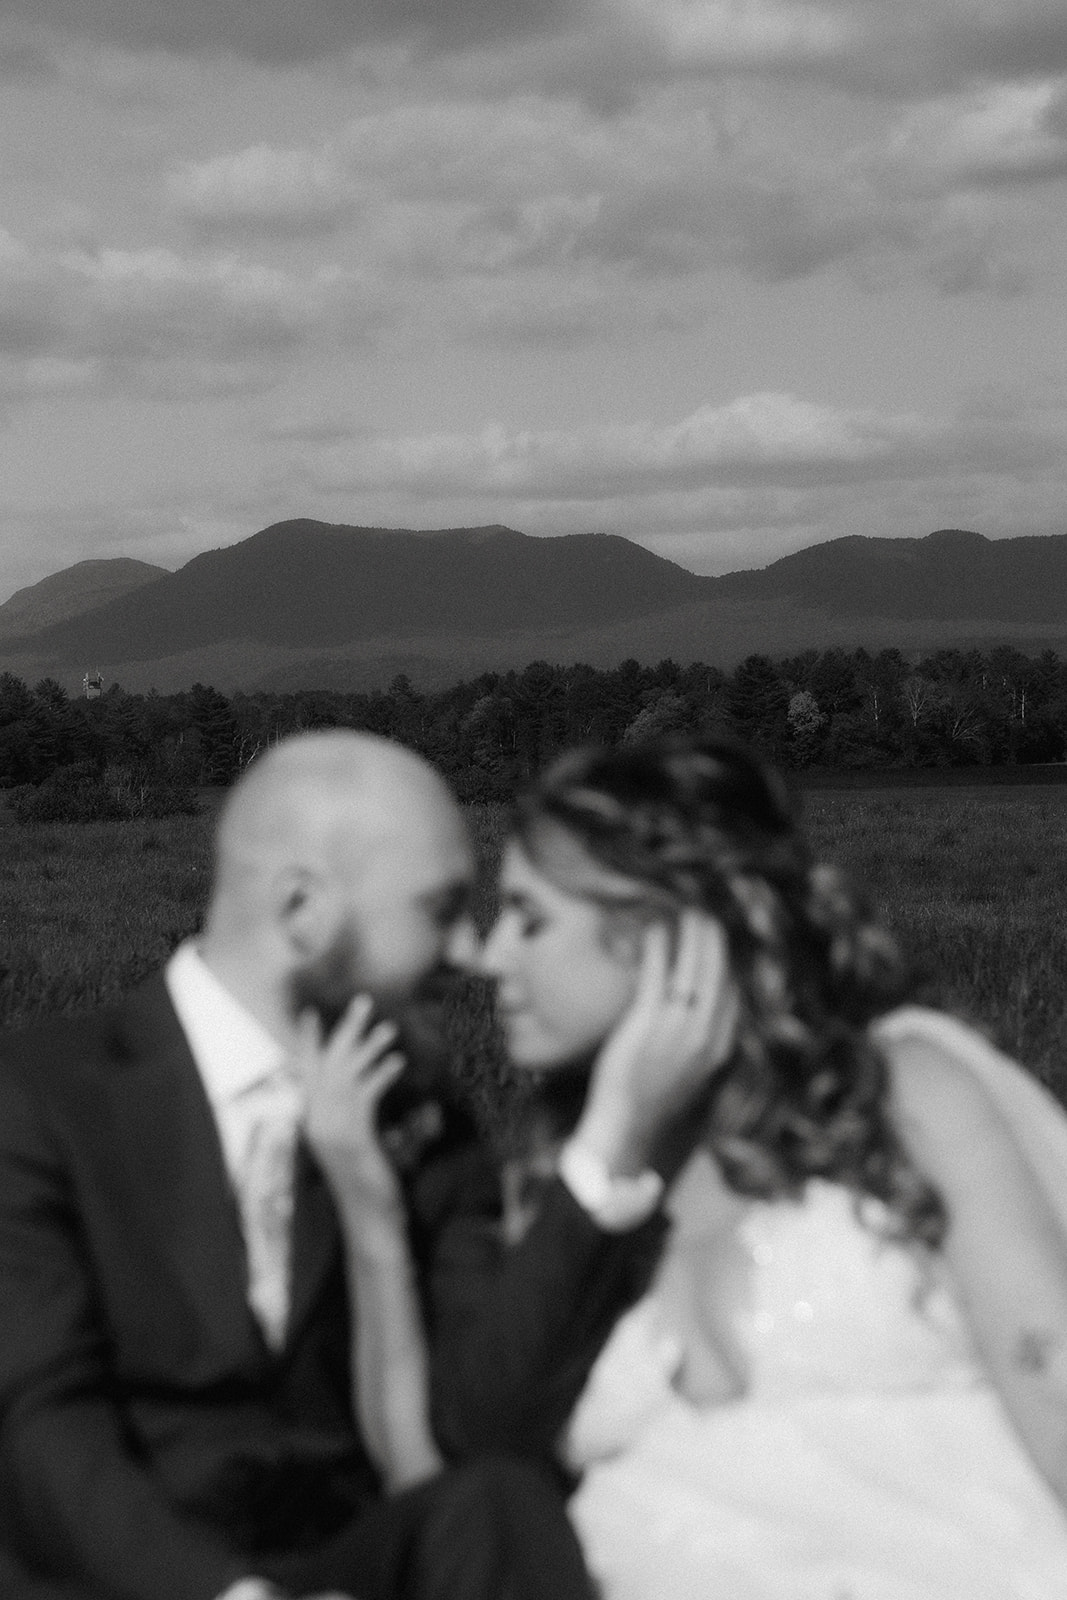 Beautiful bride and groom share an intimate moment in front of the beautiful backdrop of the Adirondack mountain